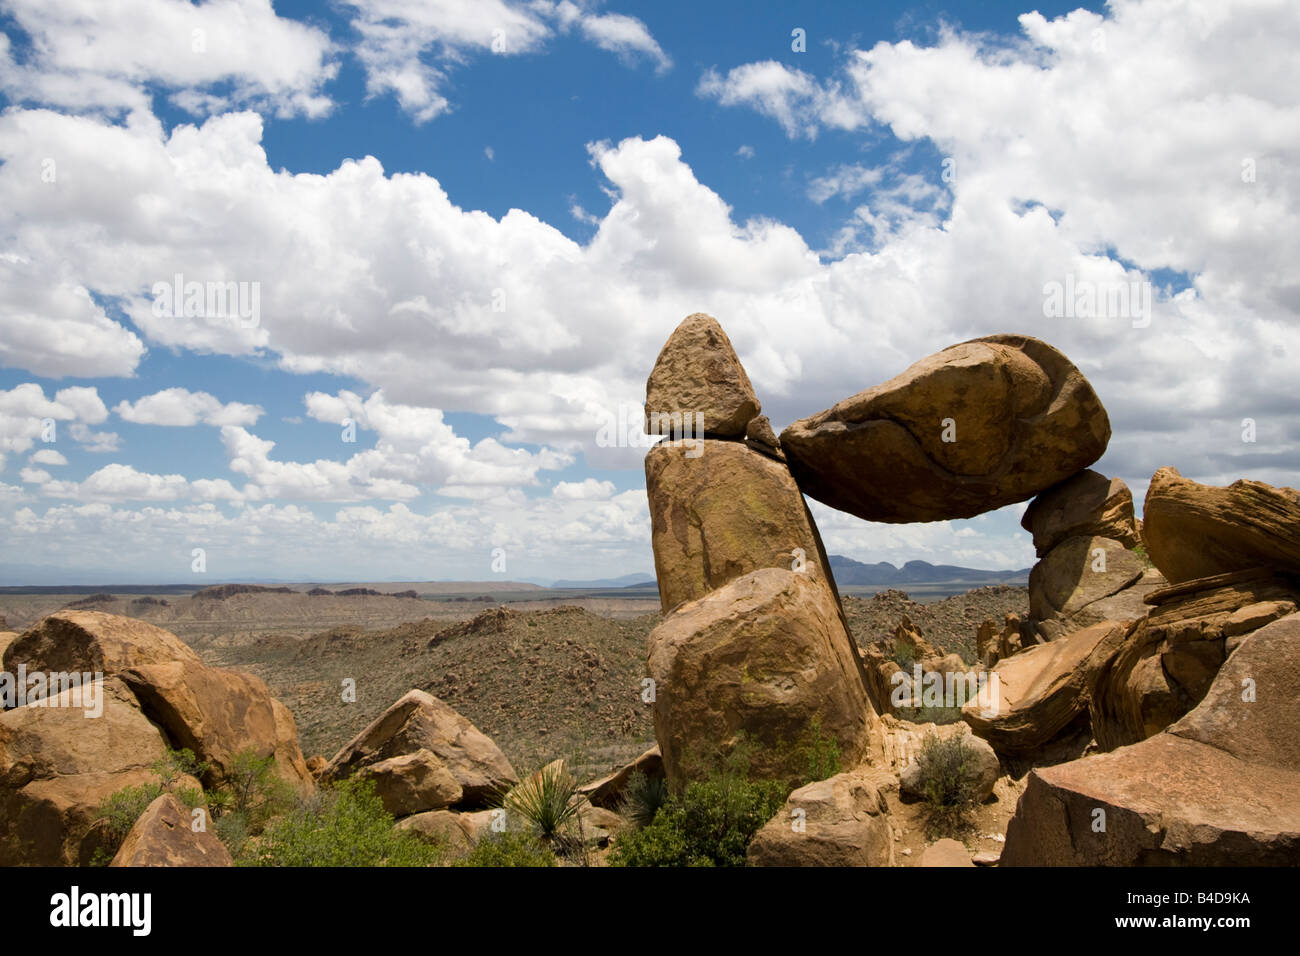 Landscape image of the Big Bend desert with Balanced Rock as a feature Stock Photo